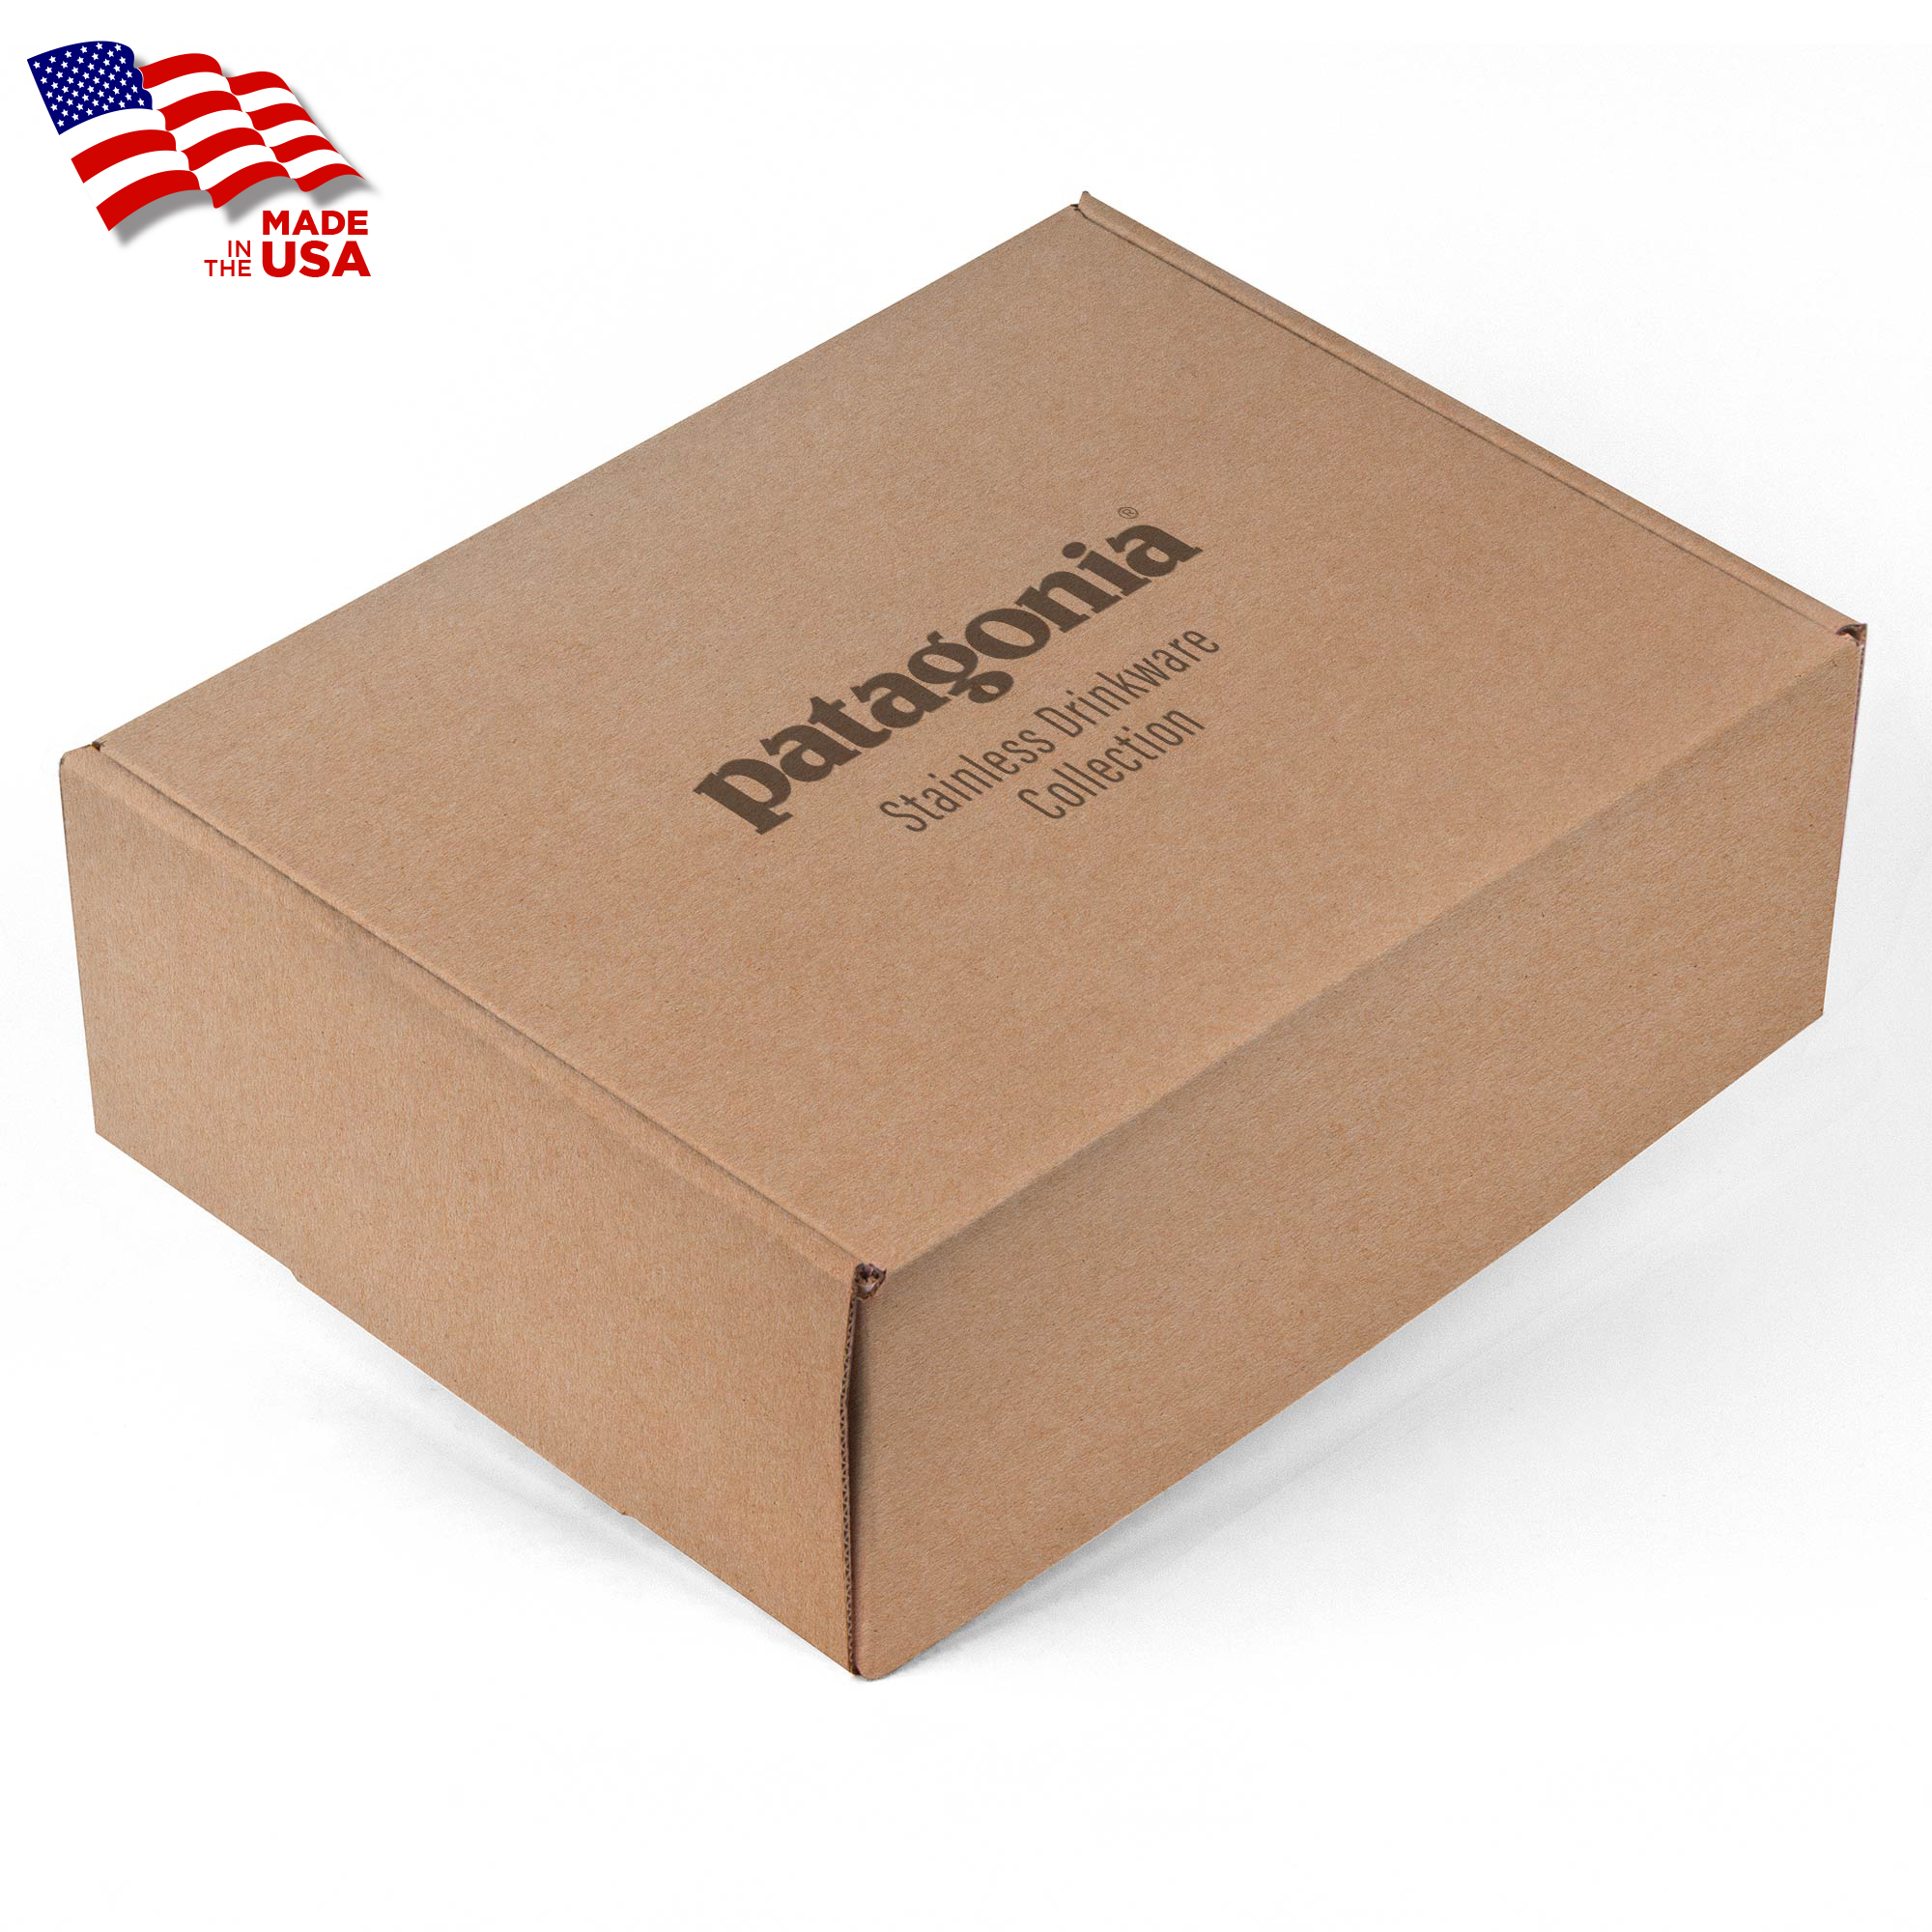 Screen Printed Corrugated Box Large Box 11x9x4 For Mailers, Gifting And Kits / (Kraft Paper Box Print, 1/0, Matte) - Printed boxes are a great way for making a custom branded presentations, direct mail marketing campaigns, custom gifts, subscription boxes, influencer boxes, 'Welcome' kits, new product launches and more! Customize these boxes with your brand's message with a screen print graphic that is eye catching and leaves a lasting impression.Features:* Eco-Friendly* Biodegradable* Compostable* Recyclable* Made in USA